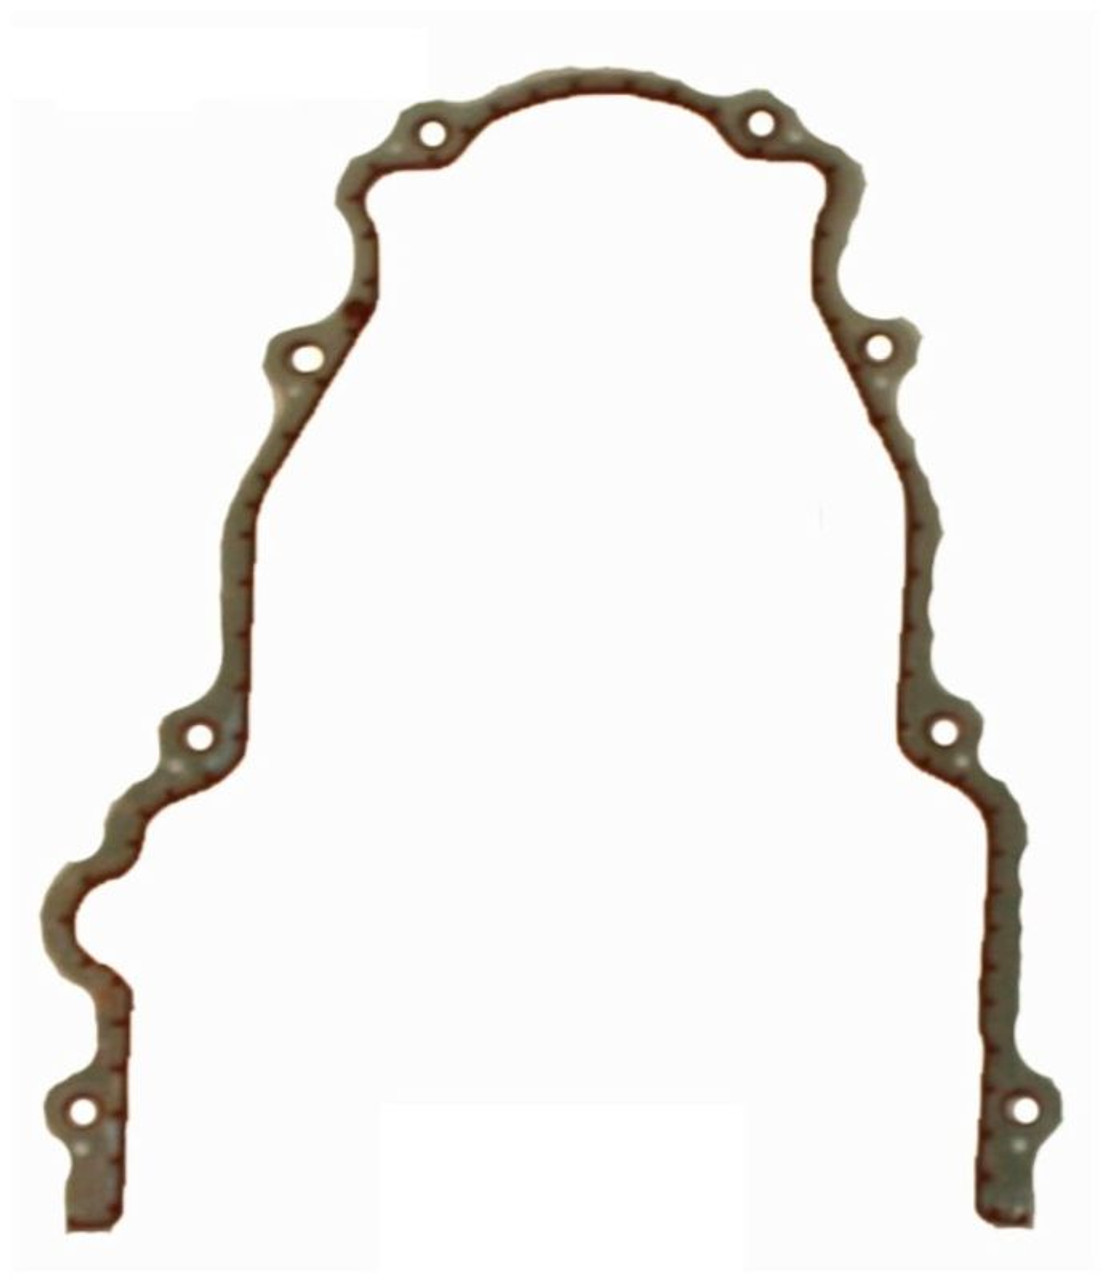 2013 Chevrolet Tahoe 6.0L Engine Timing Cover Gasket TCG293-A -840